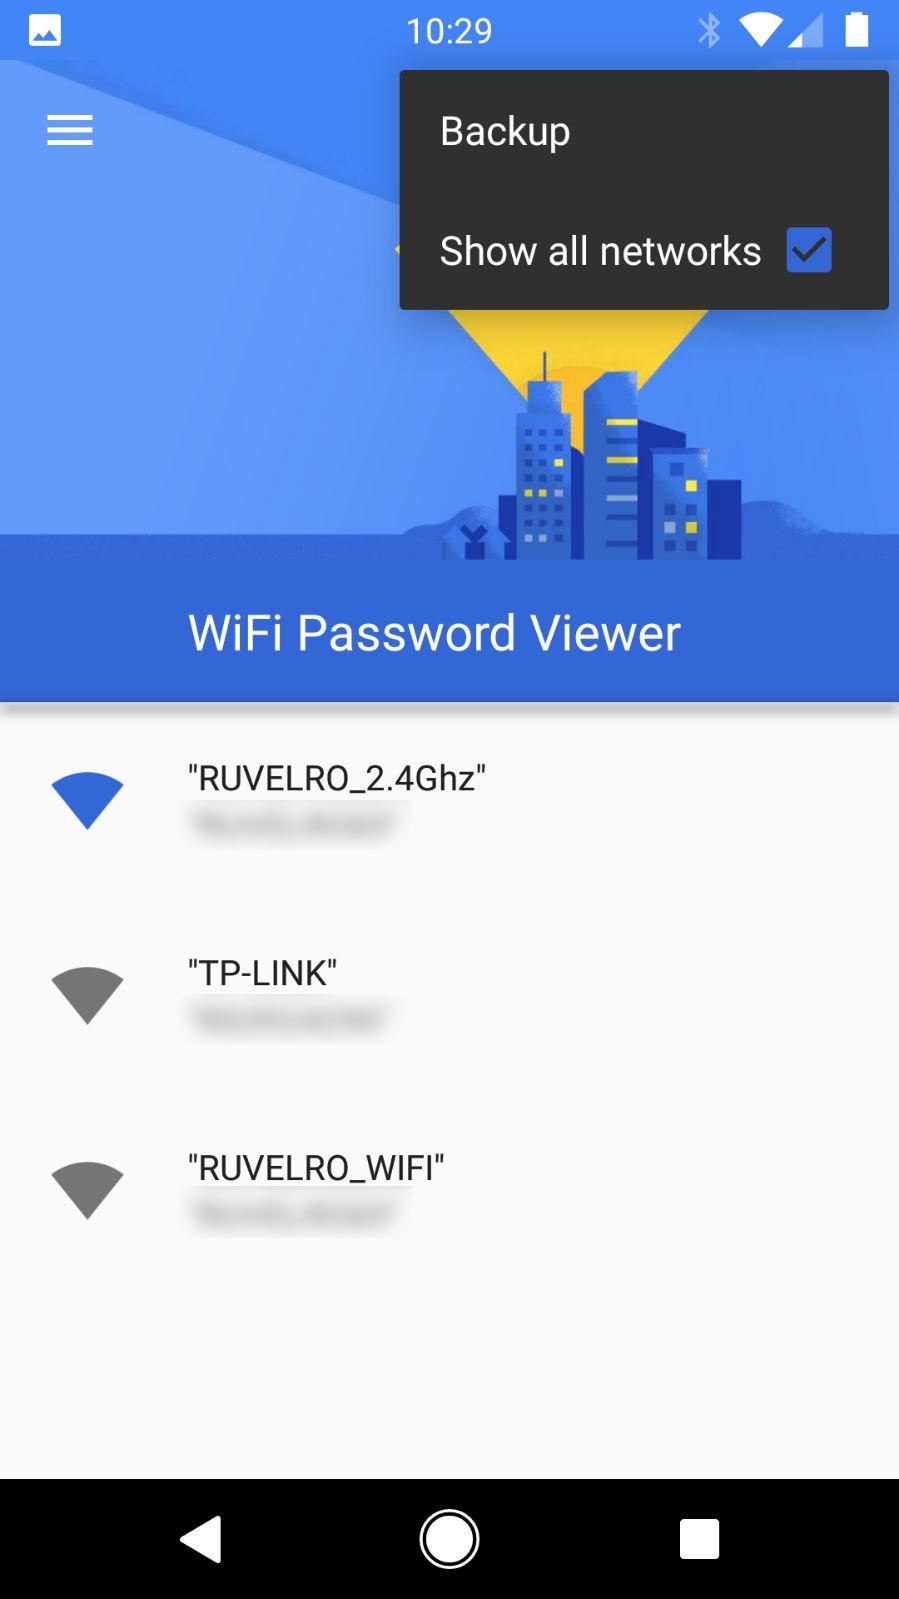 Copia de seguridad Backup redes Wi-Fi Android Wi-Fi Password Viewer